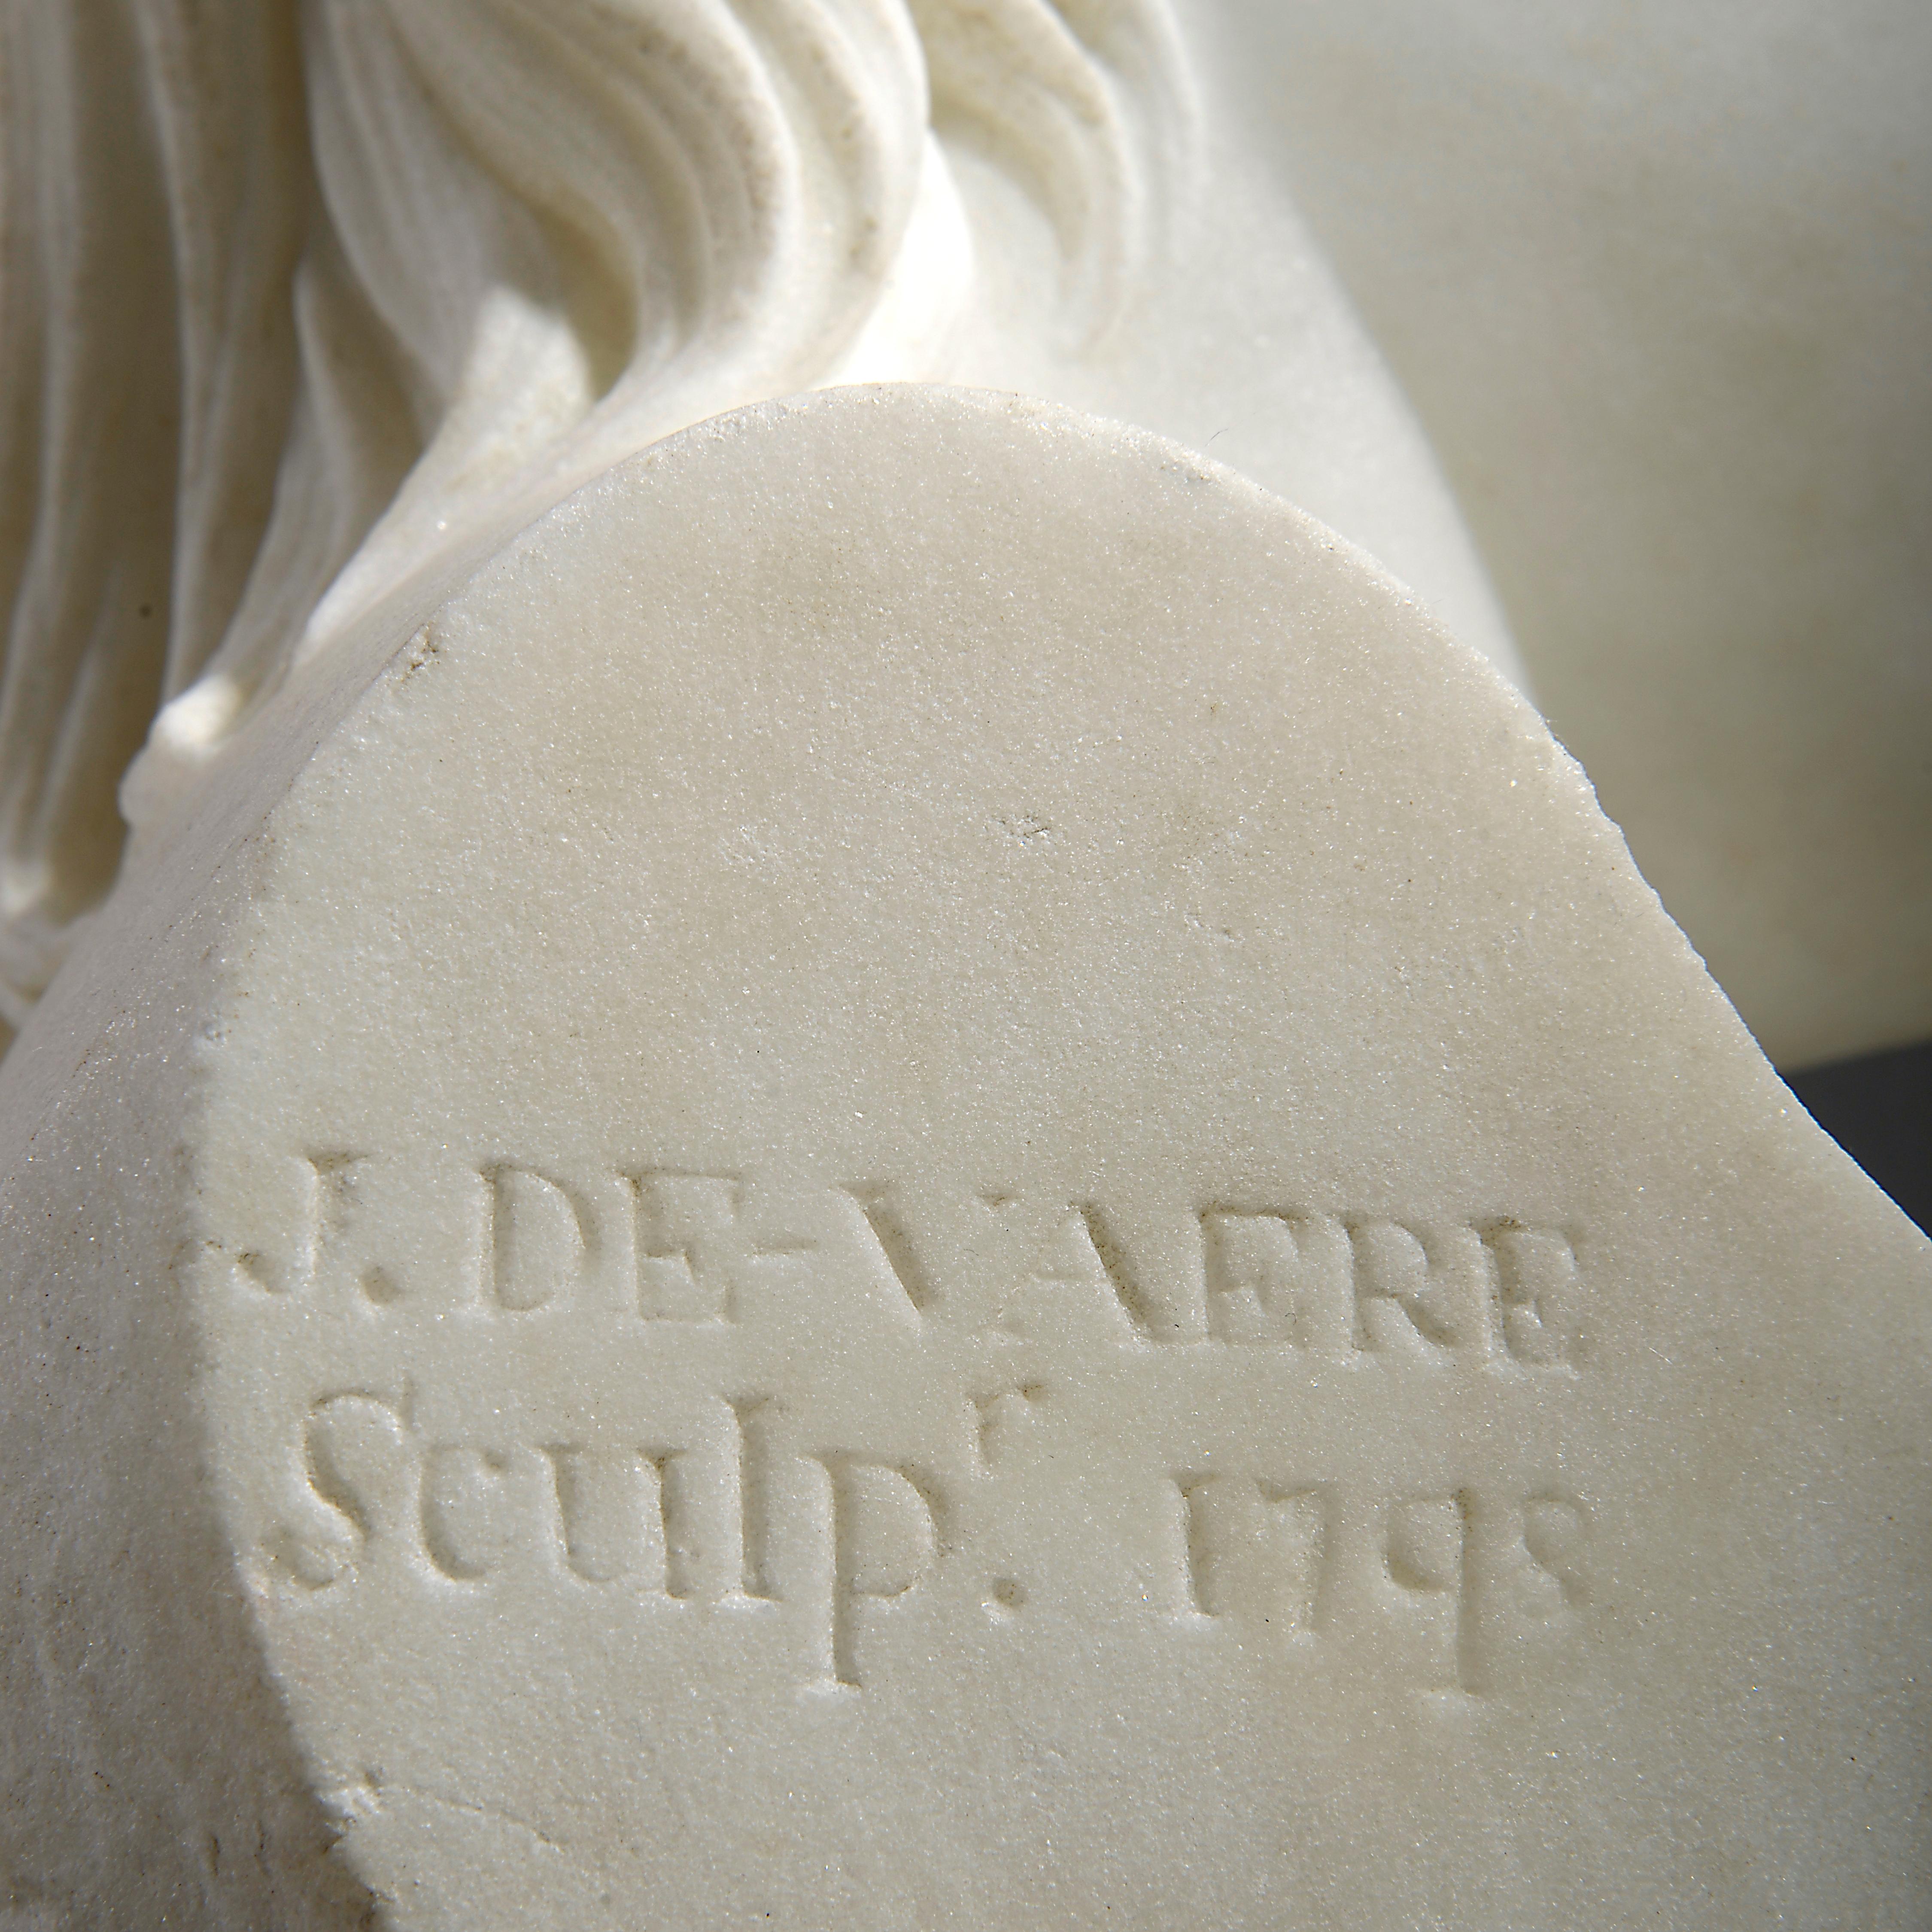 A fine pair of George III statuary marble busts of a boy and a girl by John de Vaere (1755 – 1830), 1798.

Signed J DE-VAERE Sculpr. 1798.

Considering what a sensitive and accomplished sculptor he was, surprisingly little is known about John de